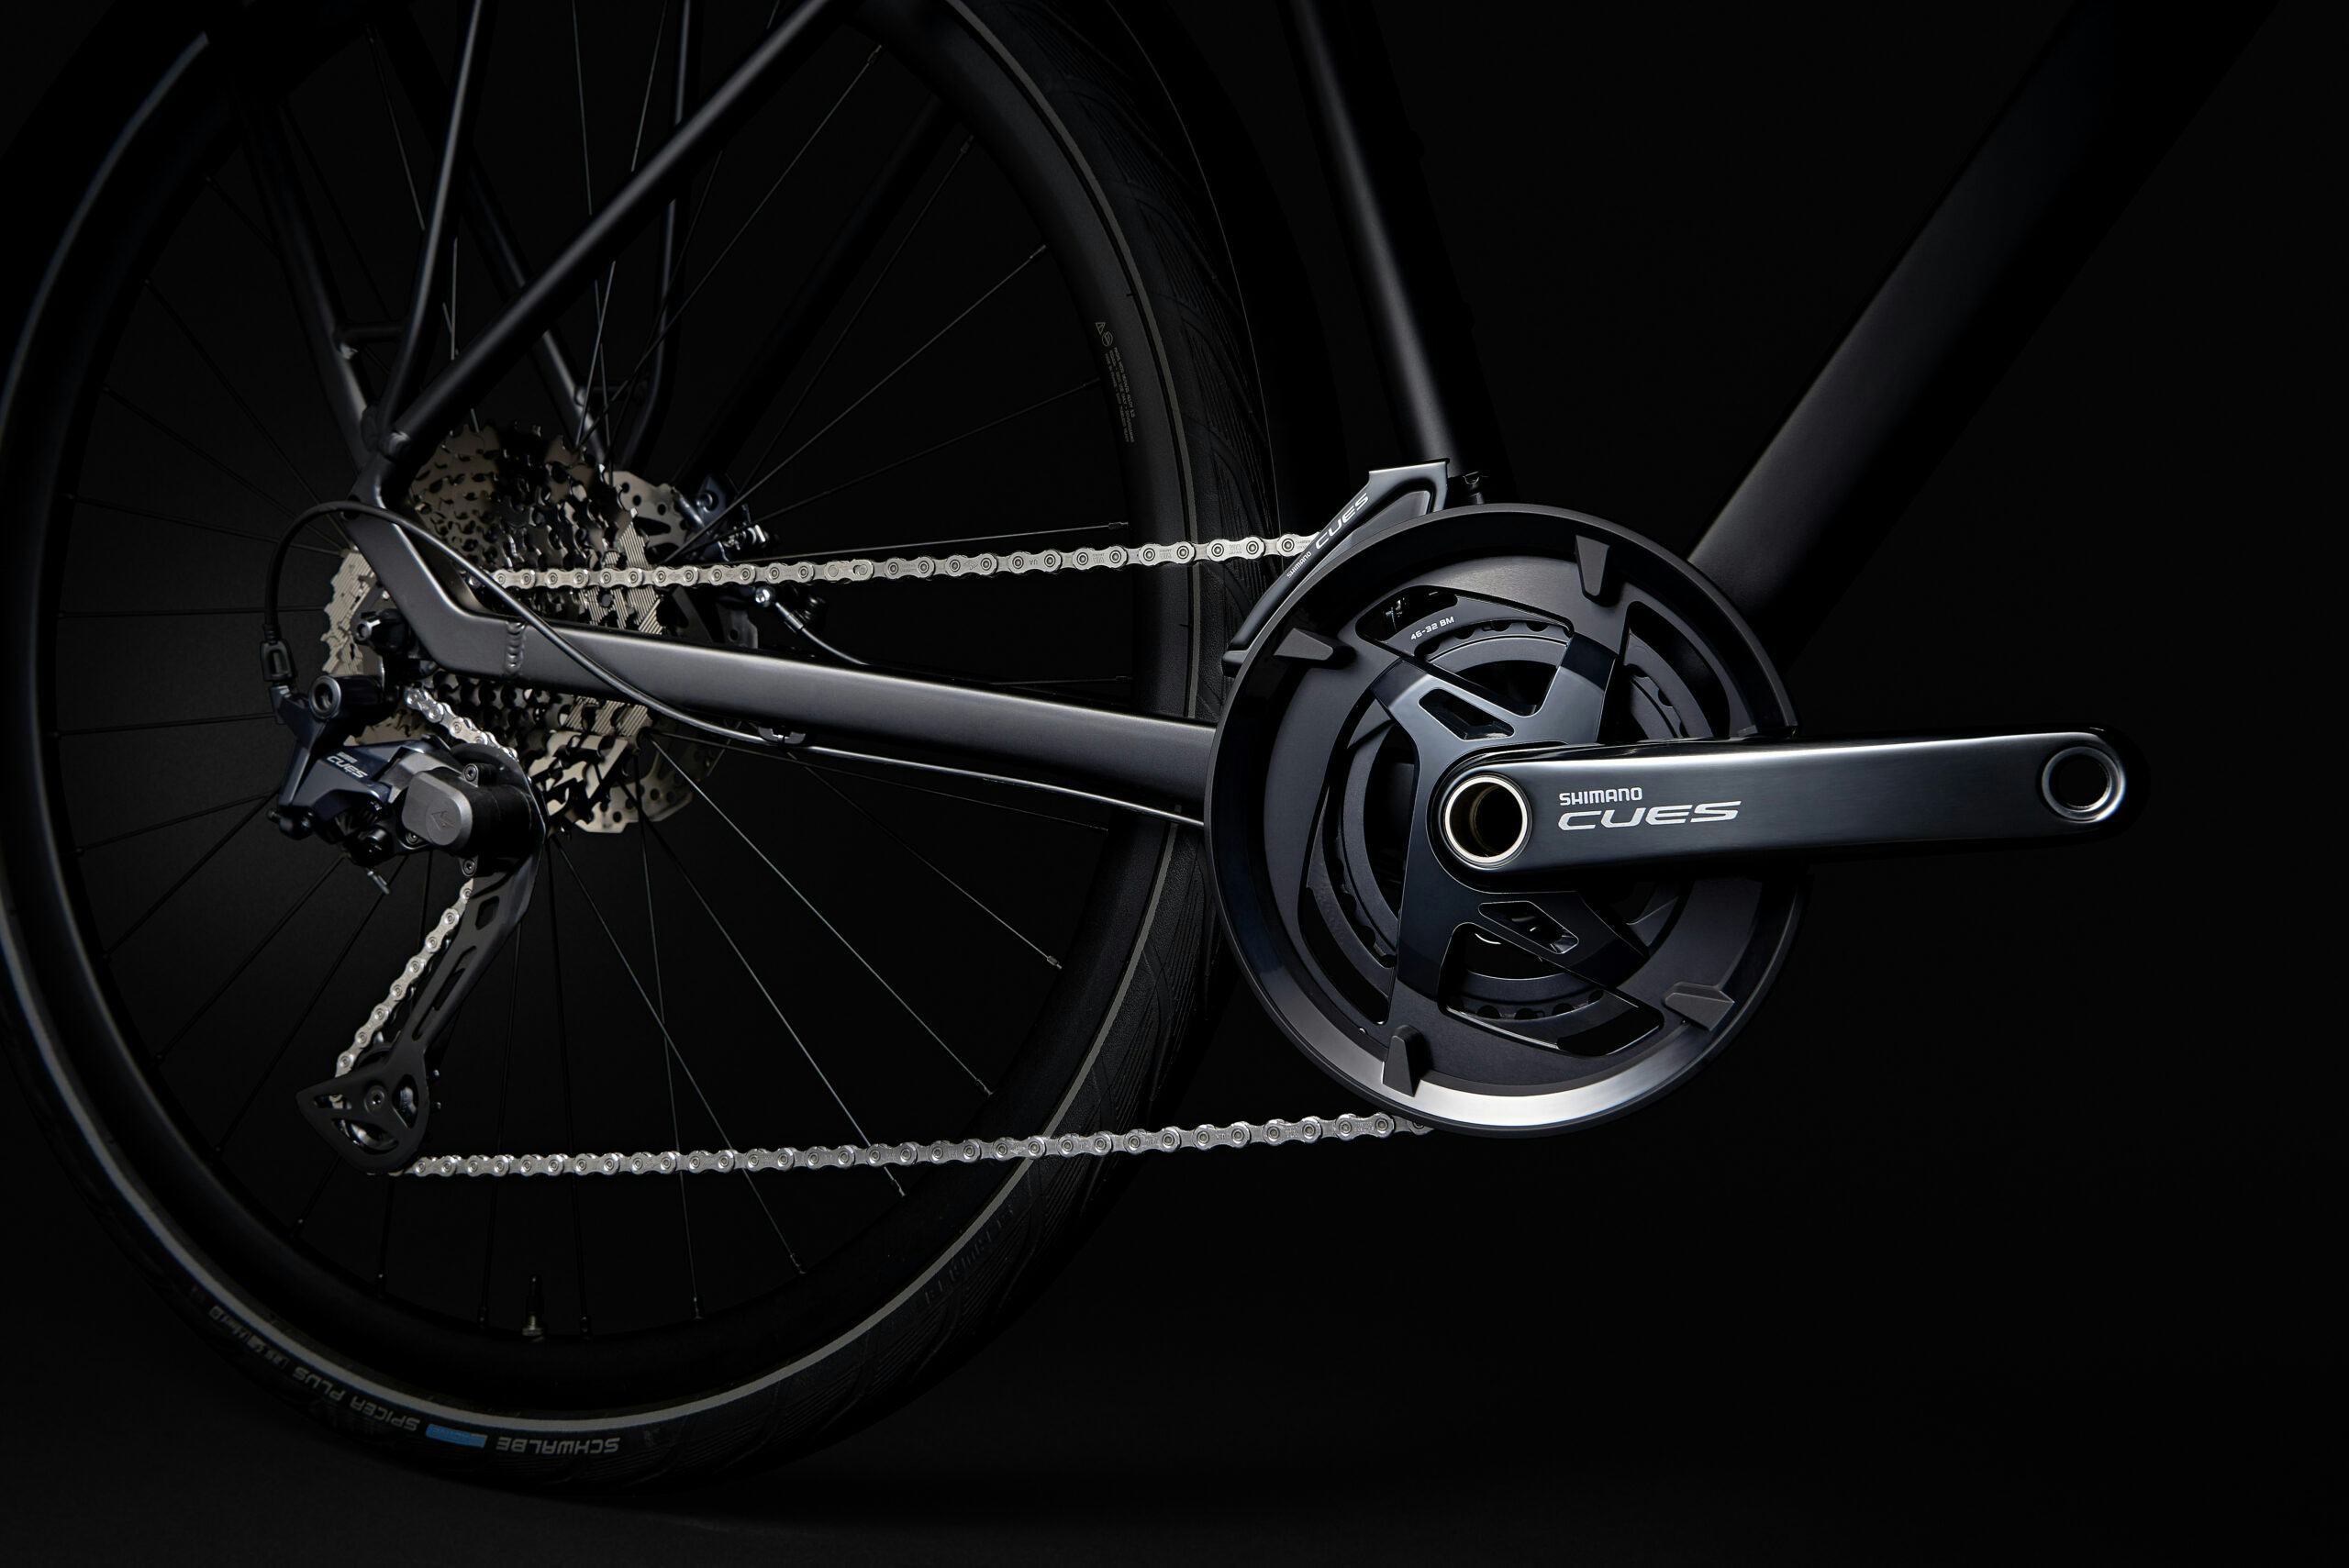 Shimano simplifies component line-up with CUES